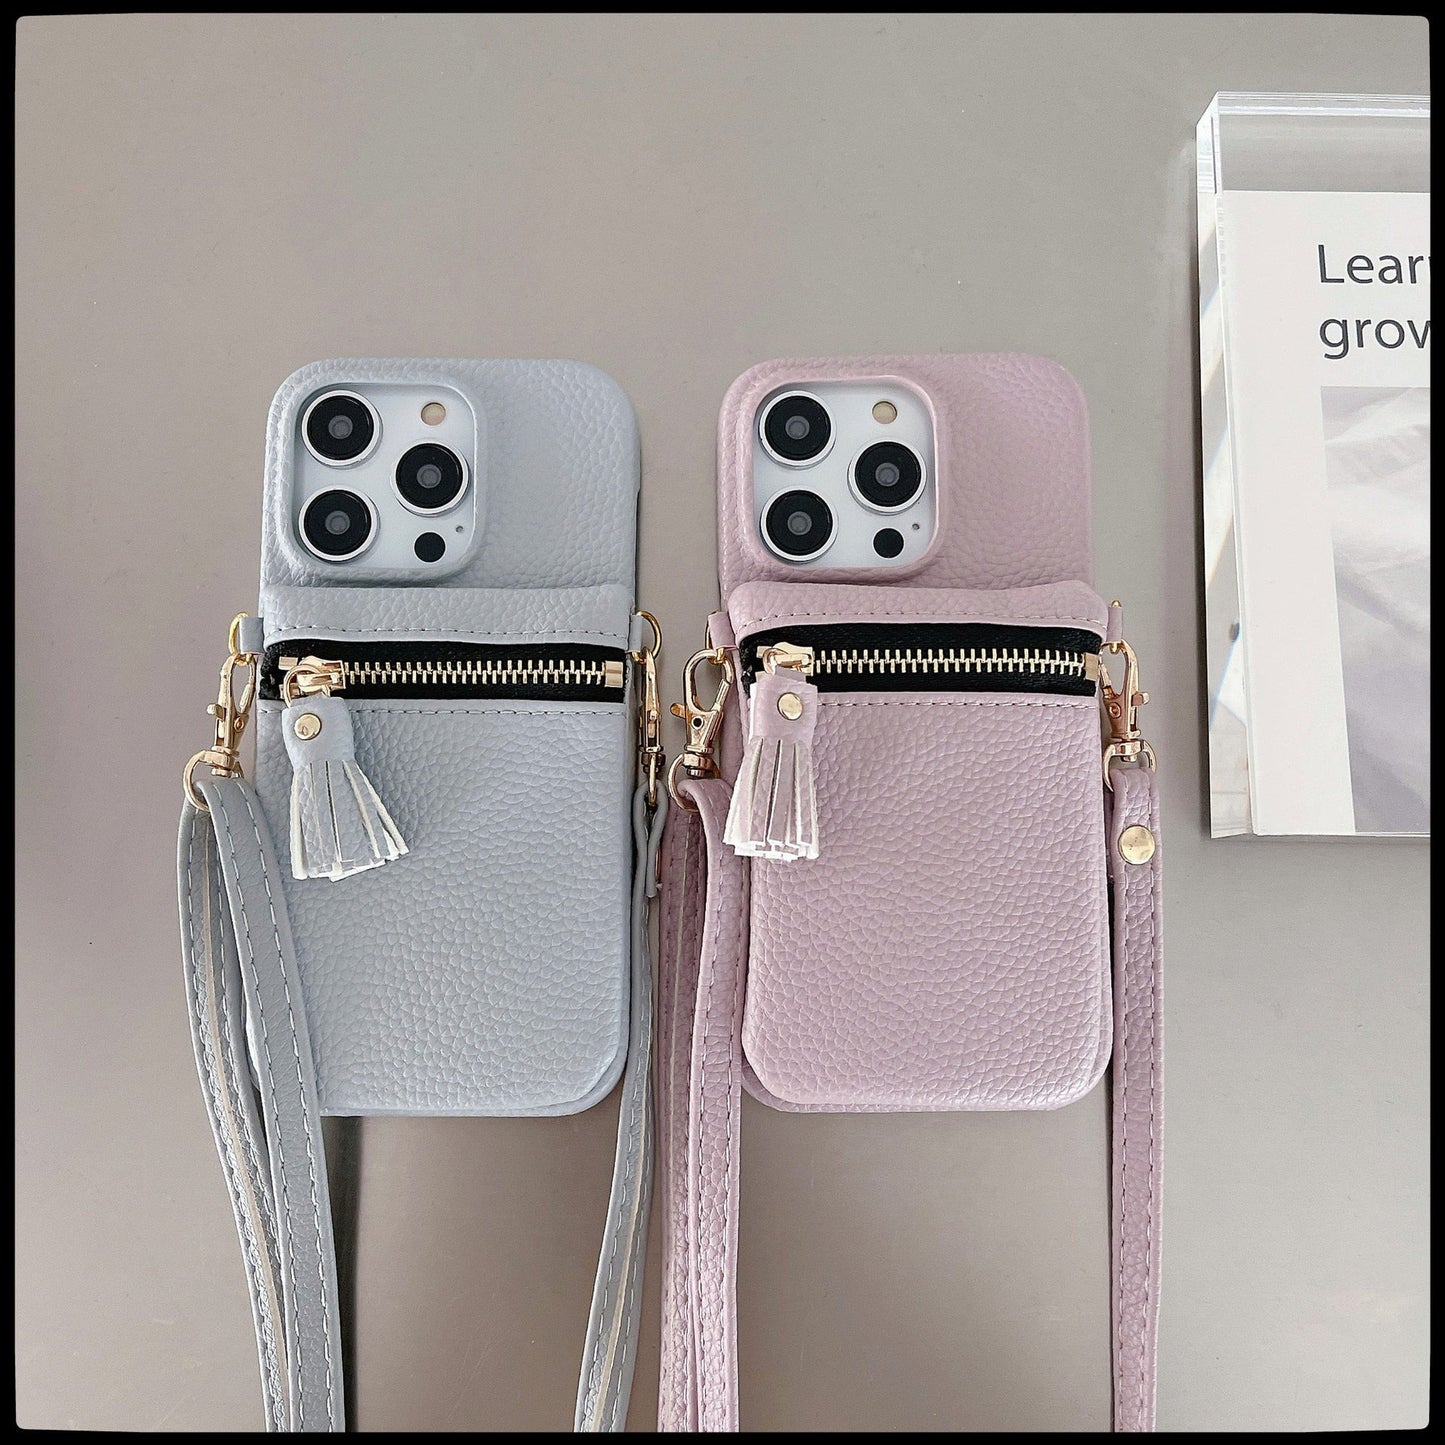 Max Zipper Pocket Purse for Credit Card Holder Phone Cases - M&H FashionMax Zipper Pocket Purse for Credit Card Holder Phone CasesiPhoneM&H FashionM&H Fashion10:351785#iPhone 14;14:771#WhiteiPhone 14WhiteCredit Card Holder Phone CasesM&H FashioniPhoneM&H FashionMax Zipper Pocket Purse for Credit Card Holder Phone Cases is the perfect accessory for your iPhone. This stylish and lightweight case features a dual layer design wMax Zipper Pocket Purse for Credit Card Holder Phone Cases